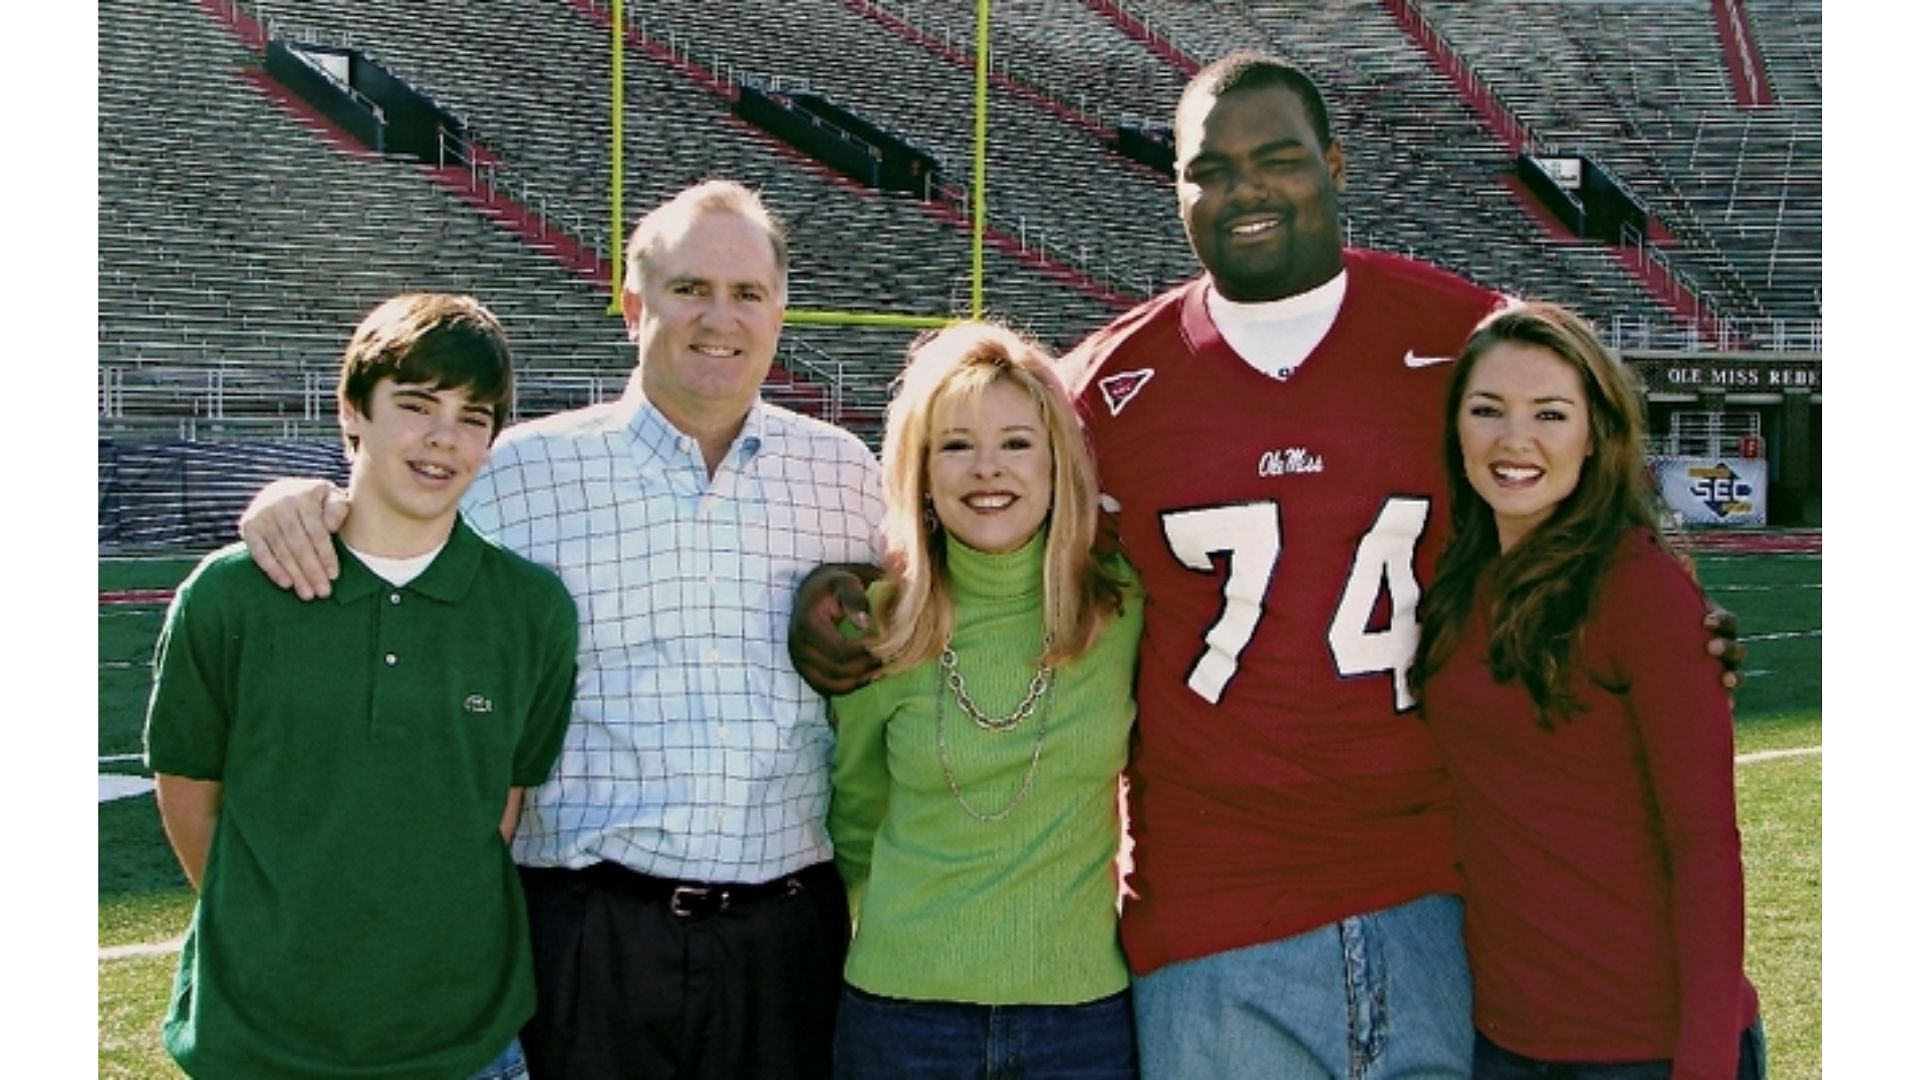 The complete Tuohy family (image via Johanesen Krause)